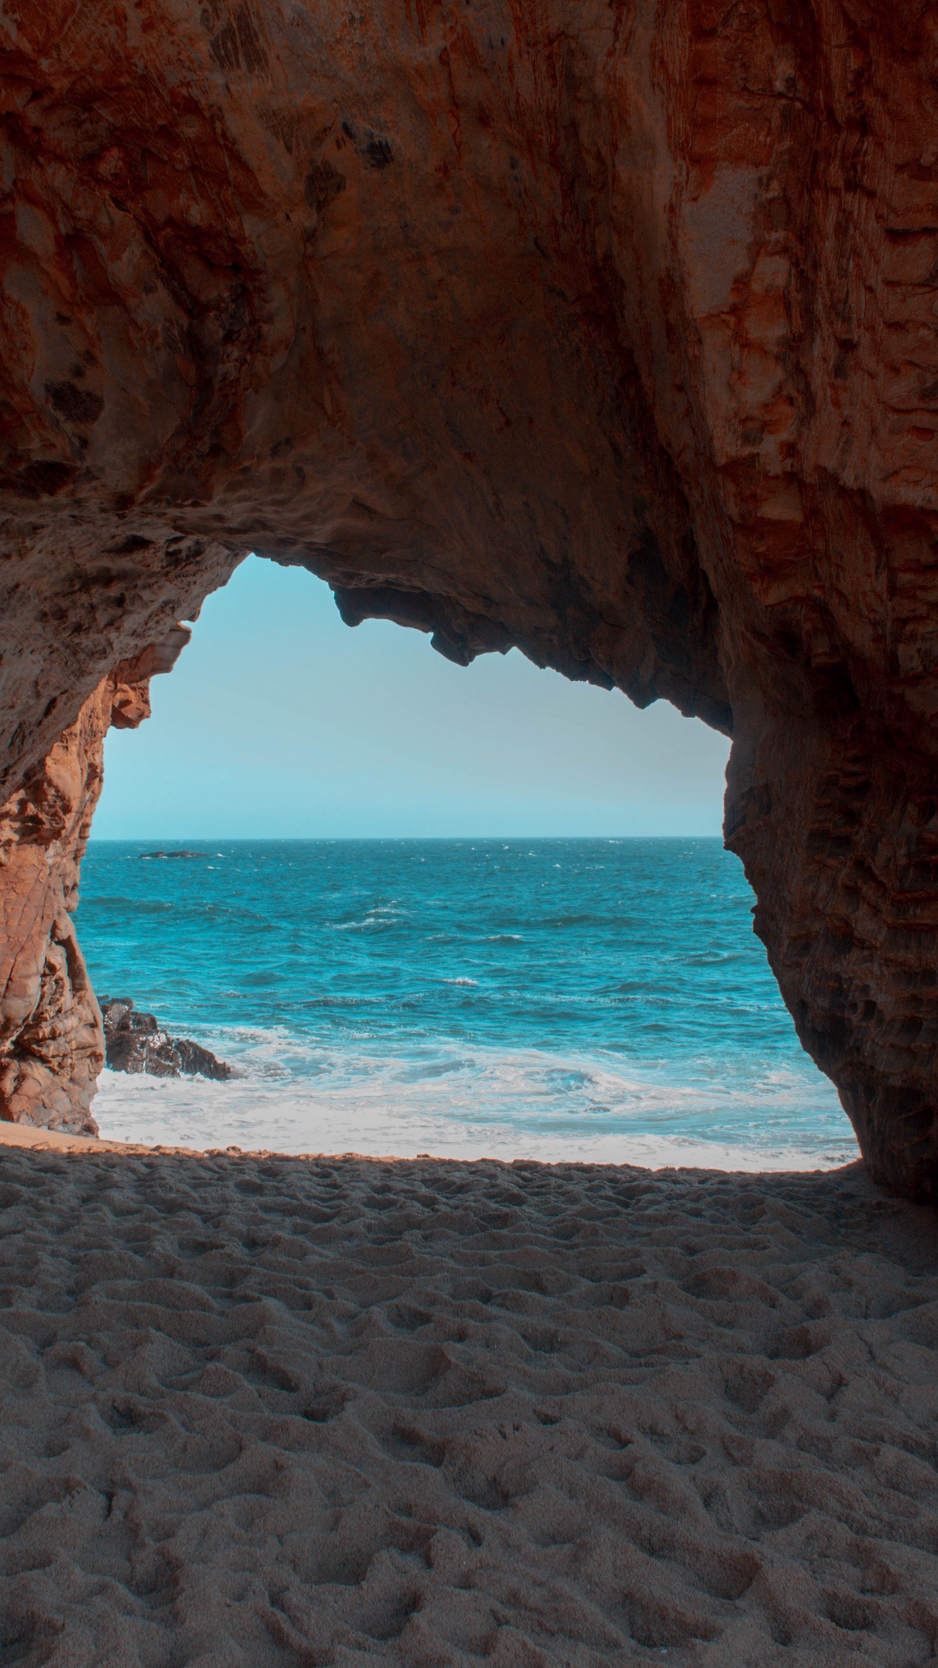 Download wallpaper 938x1668 beach, rock, cave, sea, sand, water iphone 8/7/6s/6 for 